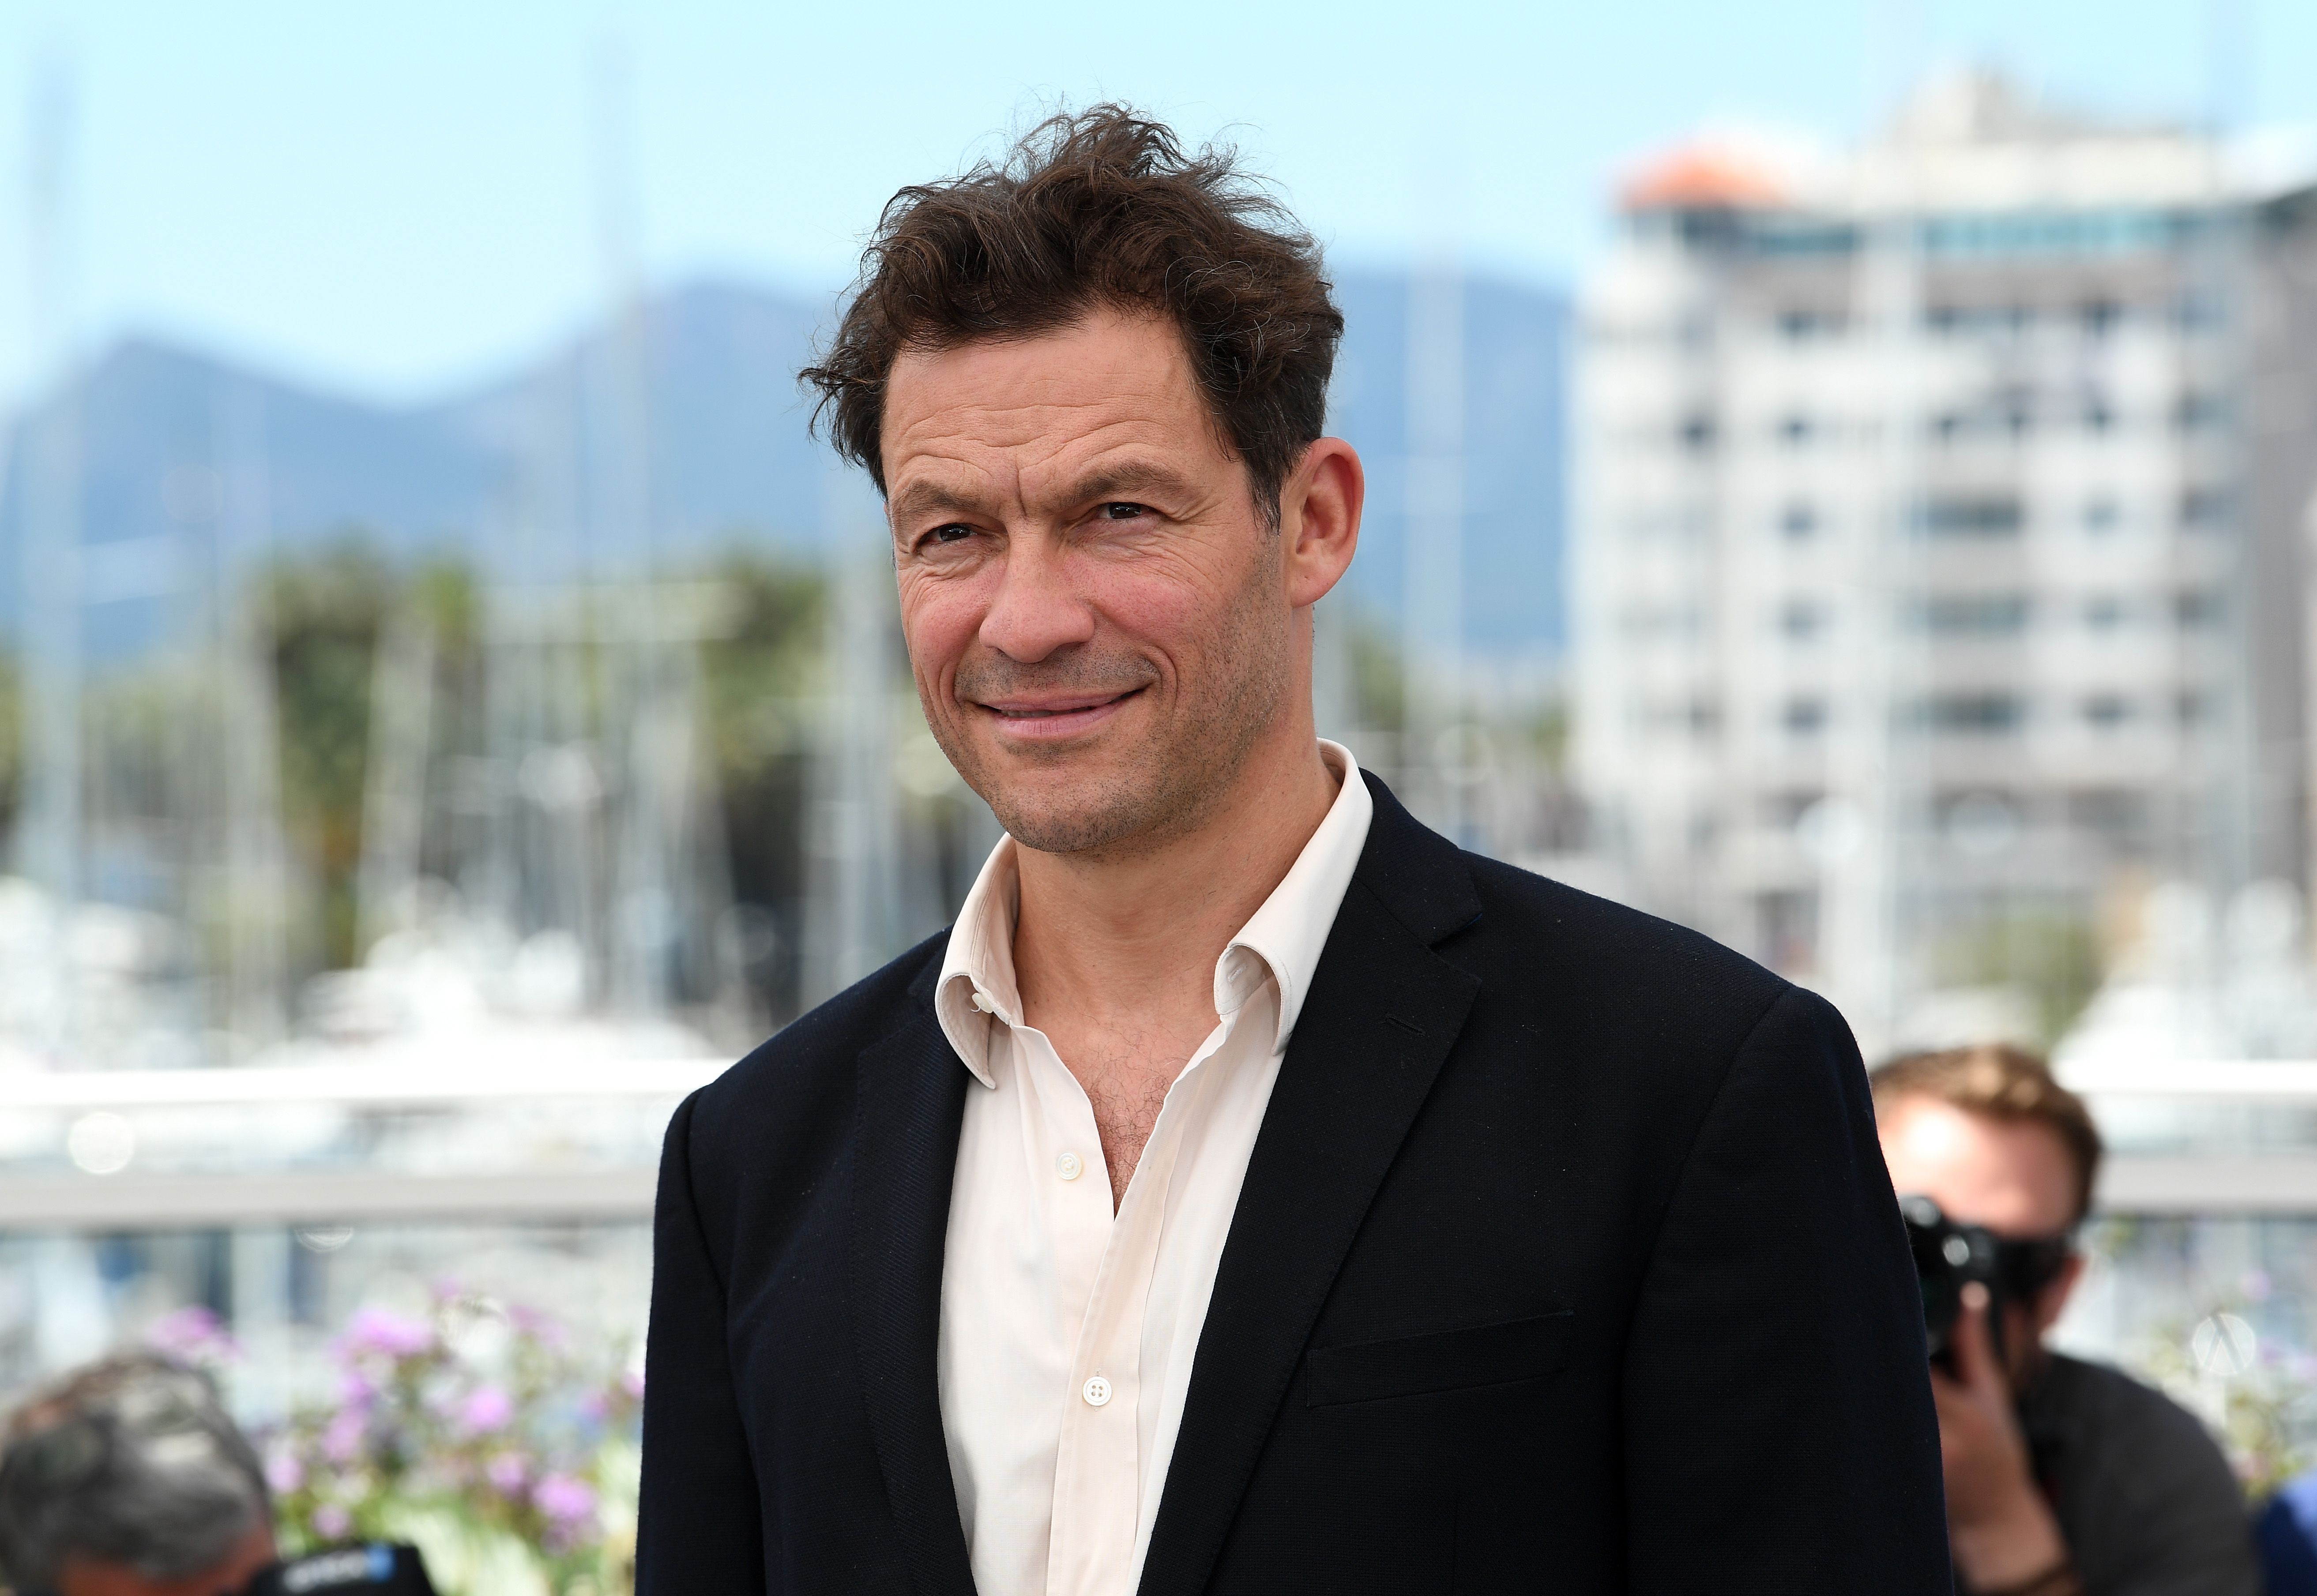 Dominic West poses in black suit at an event.